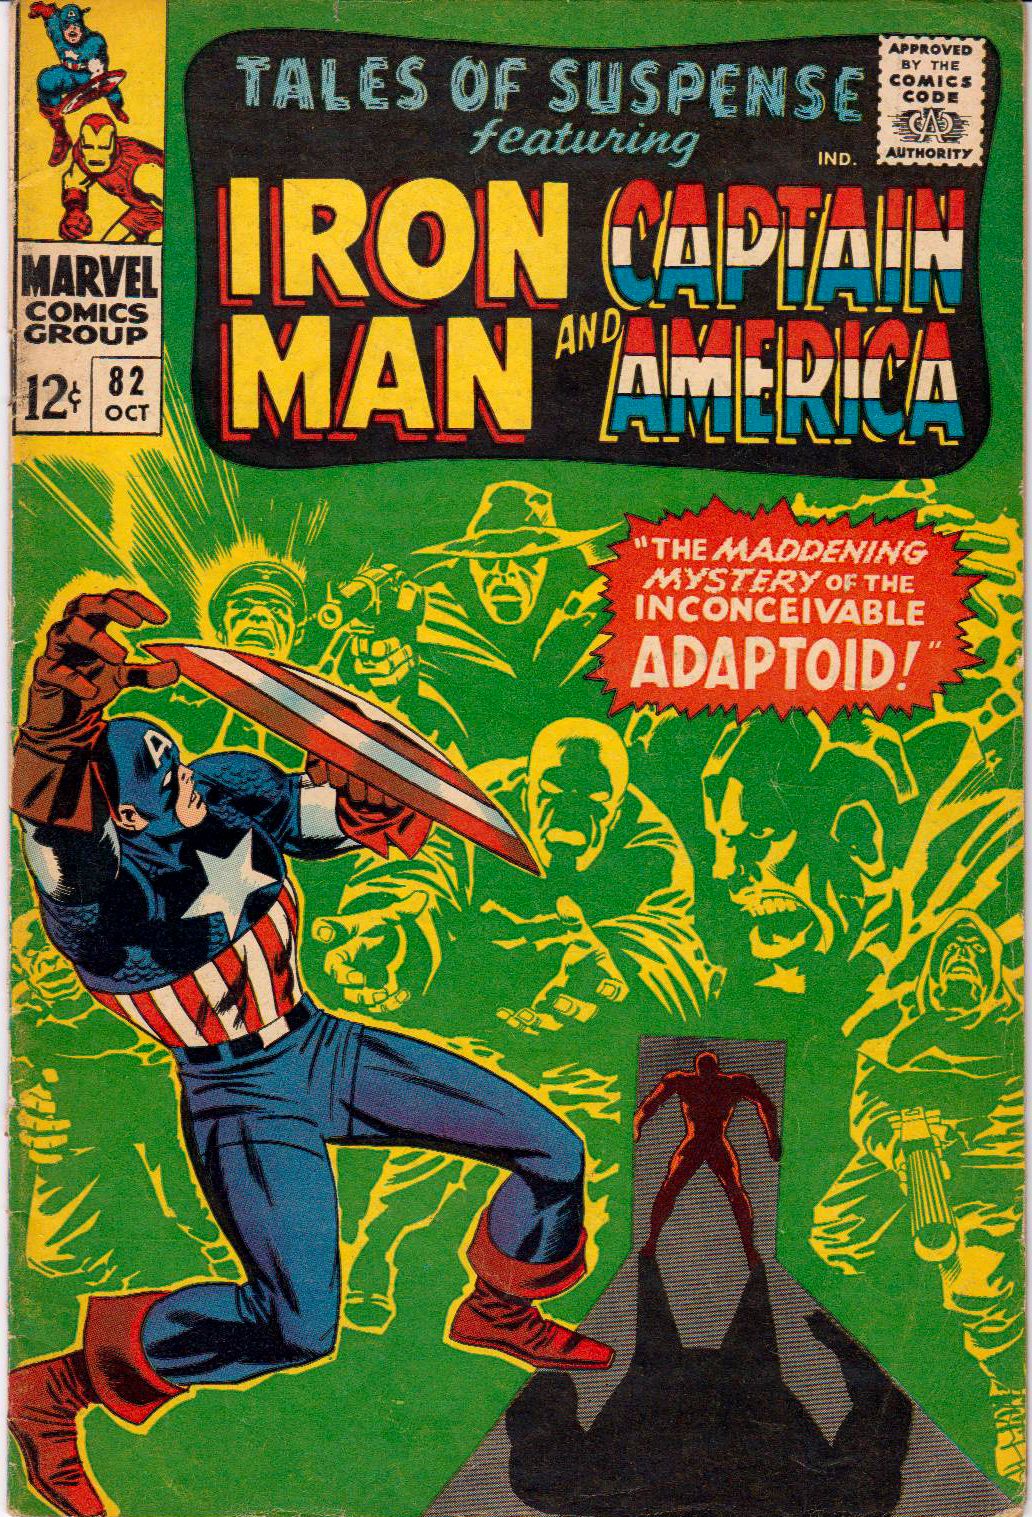 thumbnail view of Tales of Suspense #82 cover